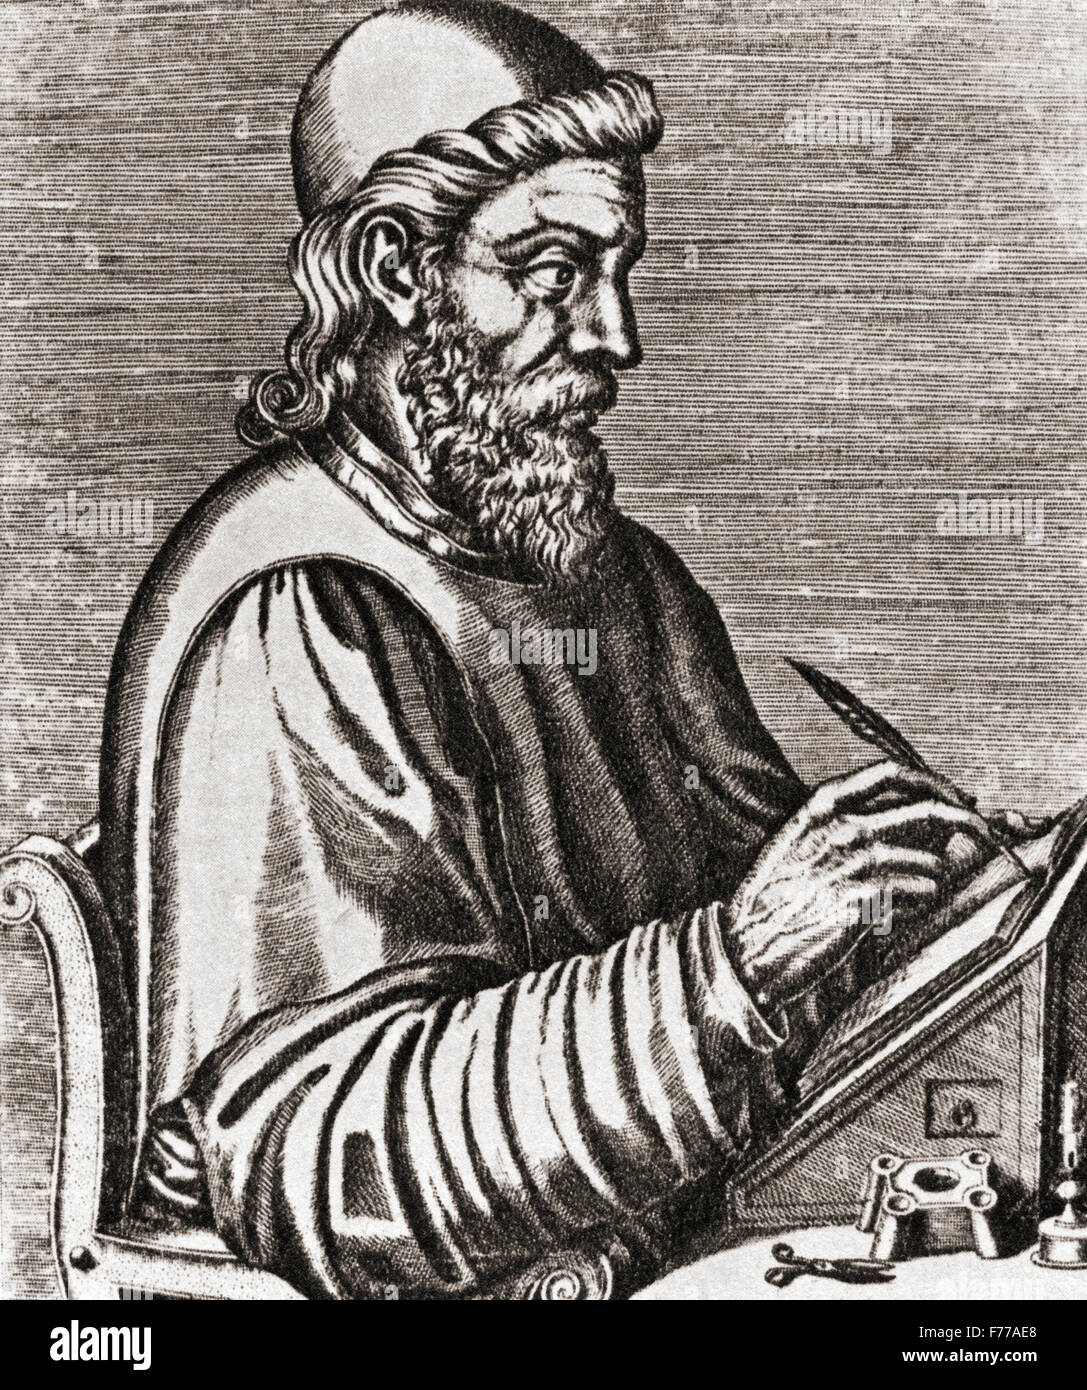 Bede, 672/673 – 735, aka Saint Bede or the Venerable Bede.  English monk. After the engraving from André Thevet's Portraits et Vies des Hommes Illustres, 1584. Stock Photo